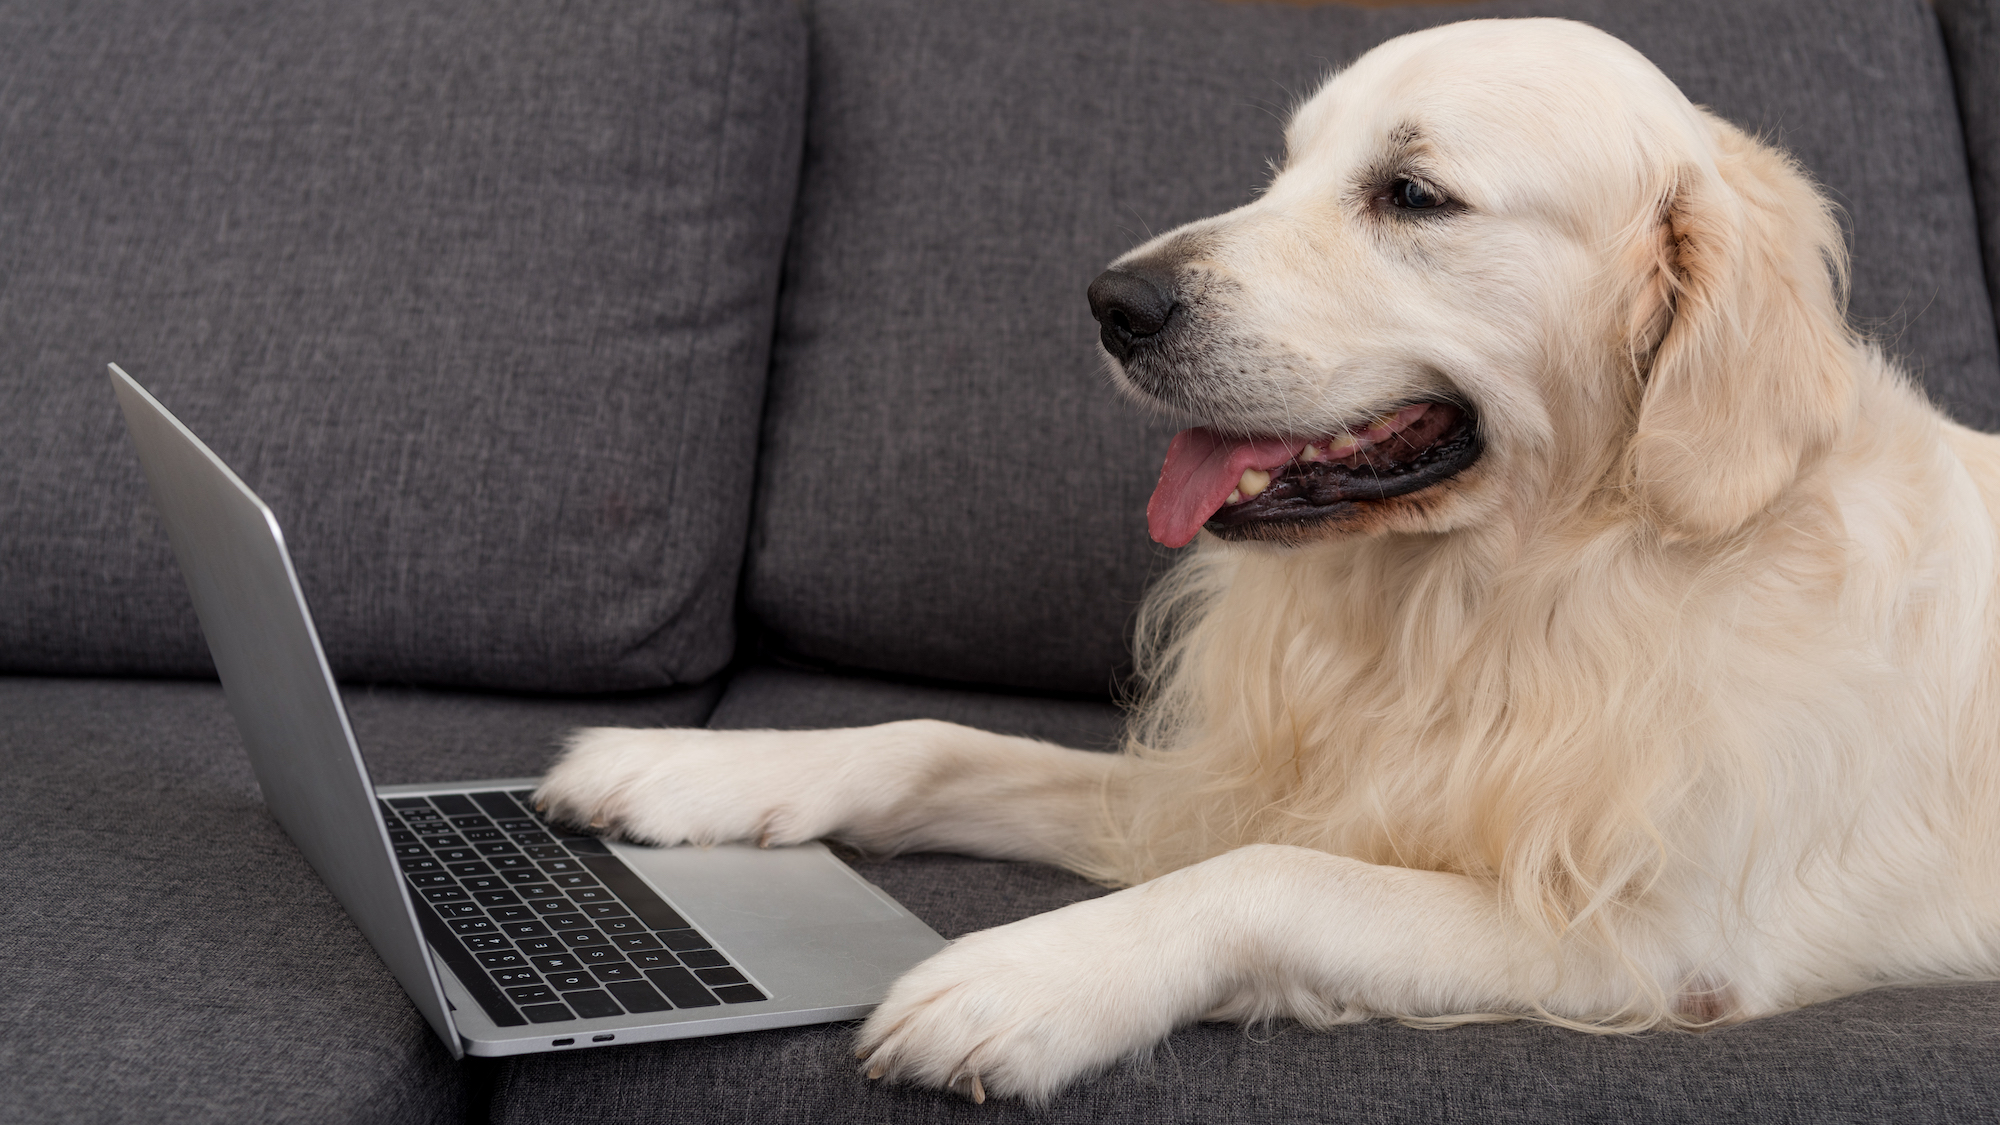 Golden retriever sitting on couch in front of laptop